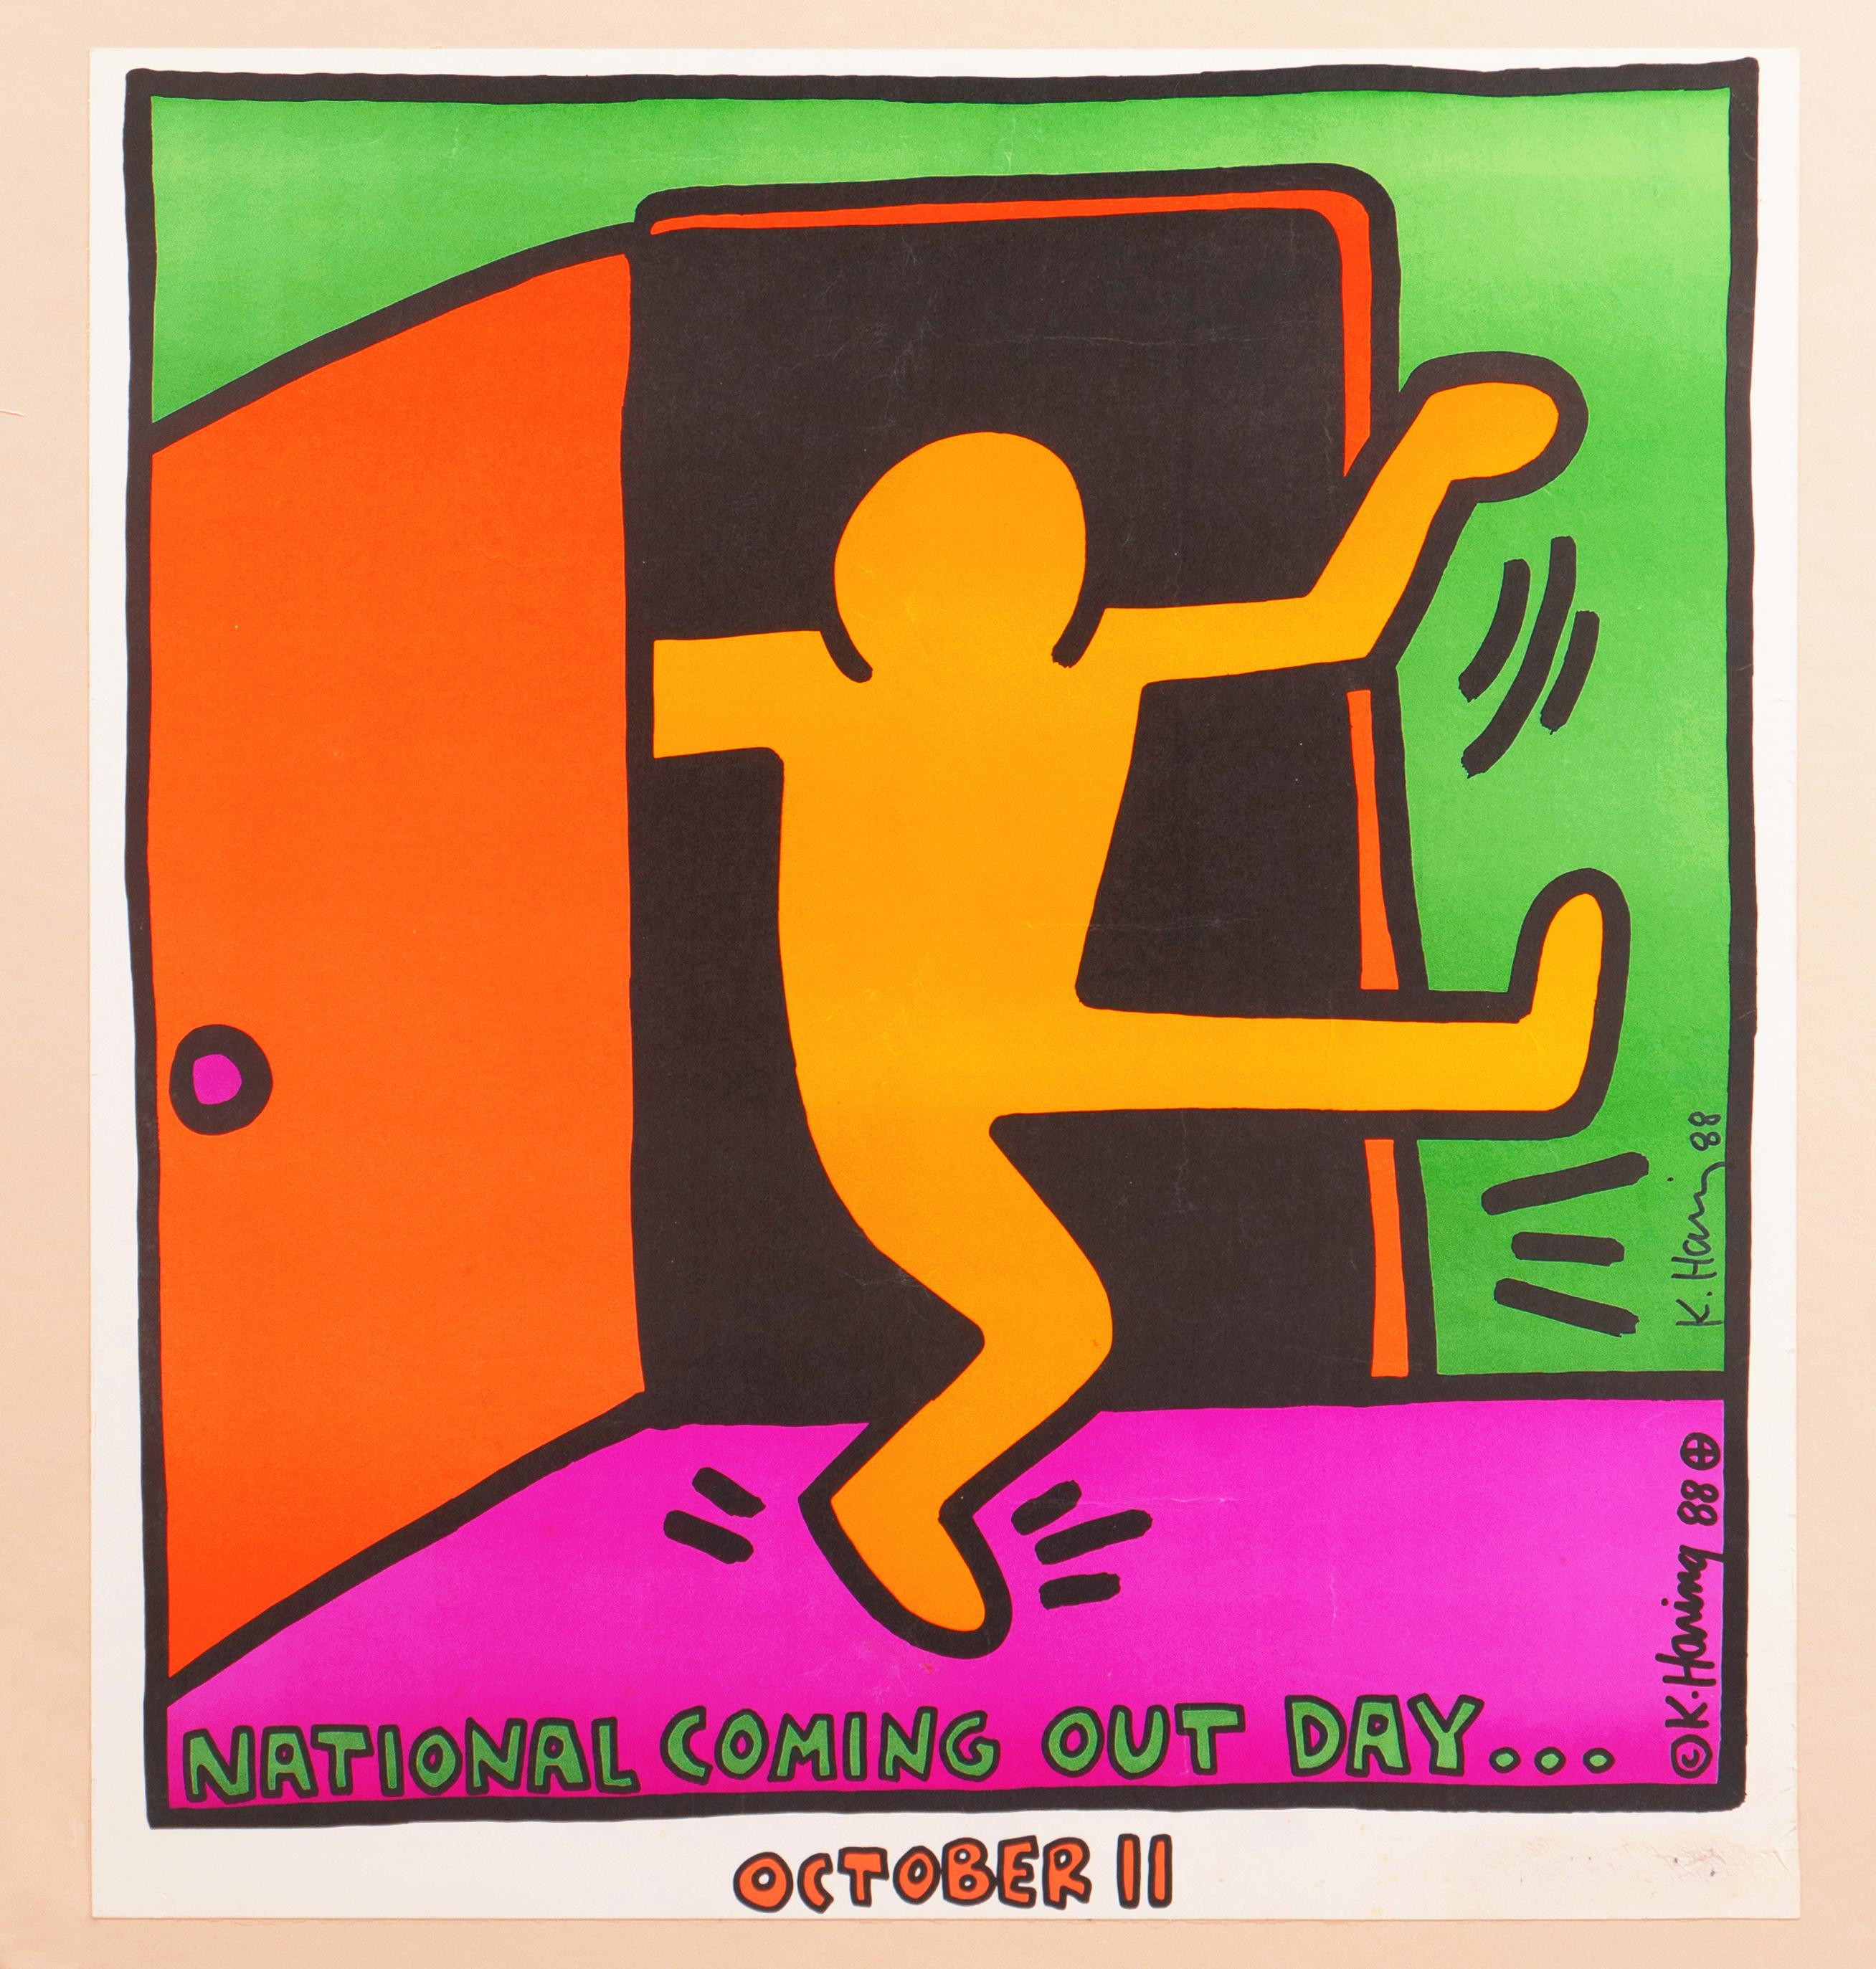 Hand signed by the artist in felt pen, lower right, above printed signature, 'K. Haring' for Keith Haring (American, 1958-1990) and dated 1988.

'National Coming Out Day'. 
Original lithographed poster printed at Pop Shop, New York, under the